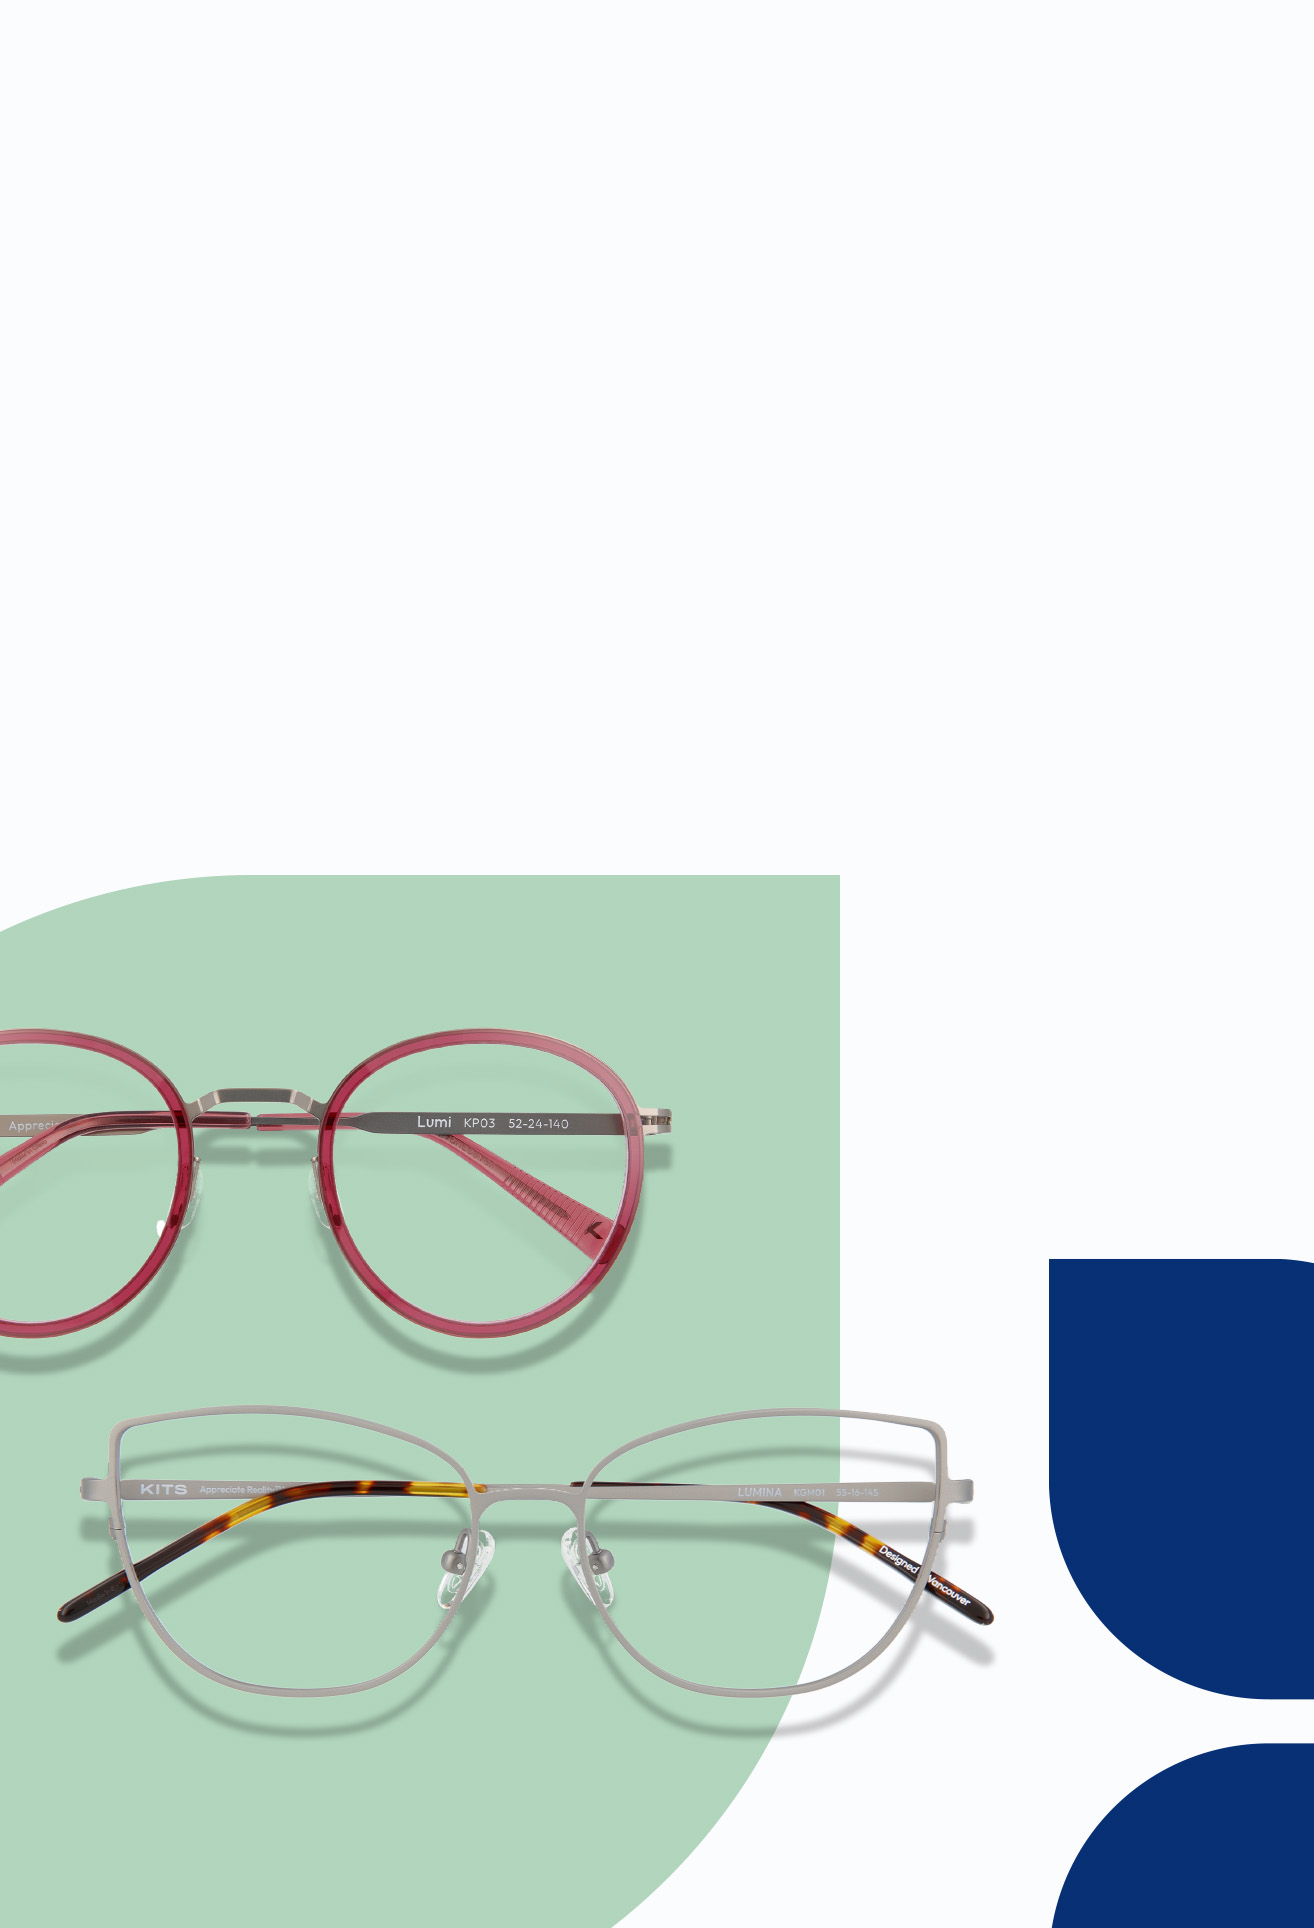 Shop High-Quality Glasses, Contacts & Eyewear